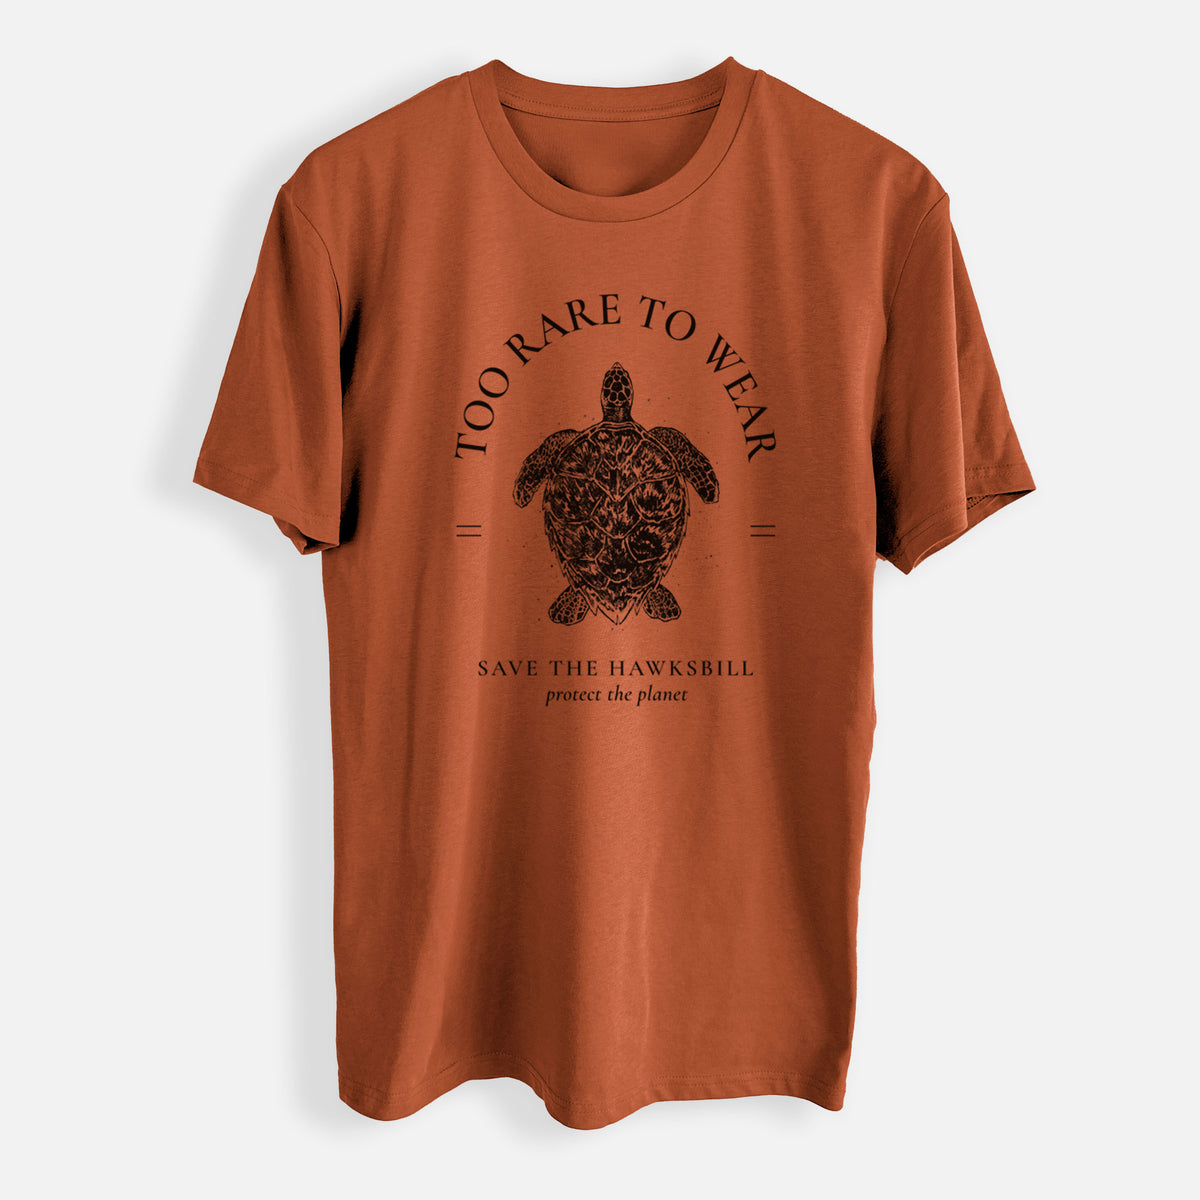 Too Rare to Wear - Save the Hawksbill - Mens Everyday Staple Tee